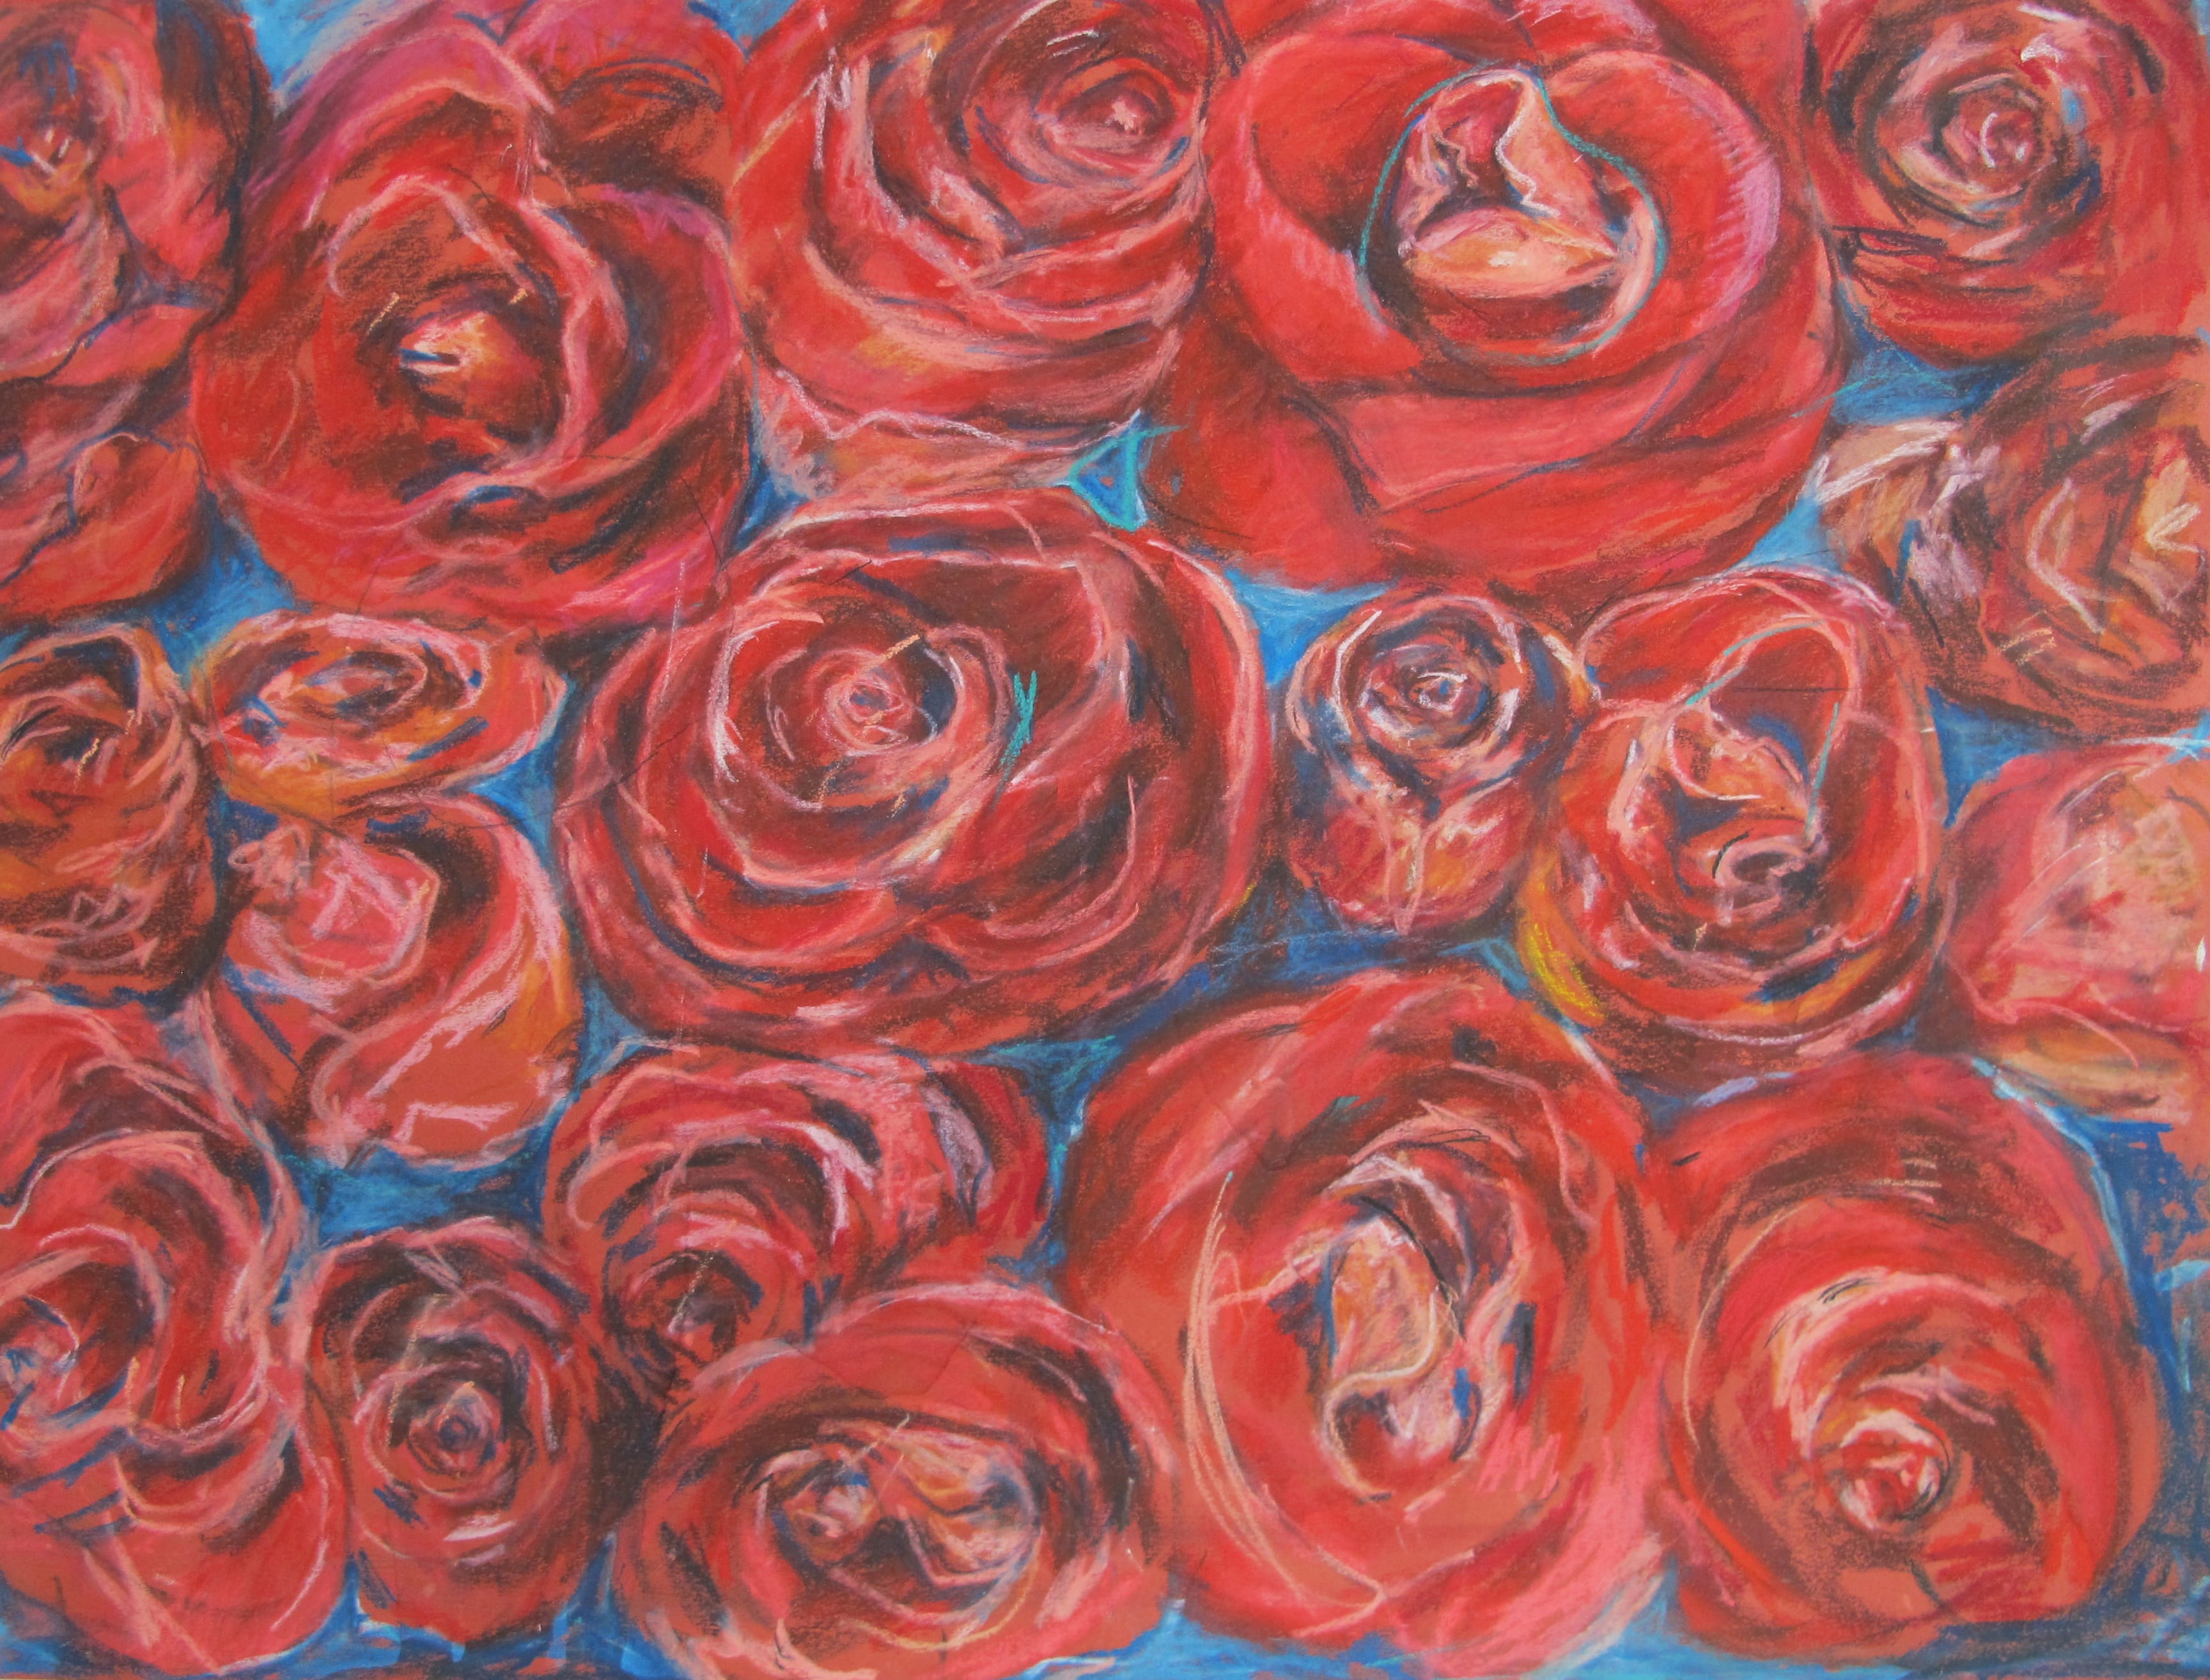 Rose is a Rose is a Rose, 2014, 50 x 65 cm